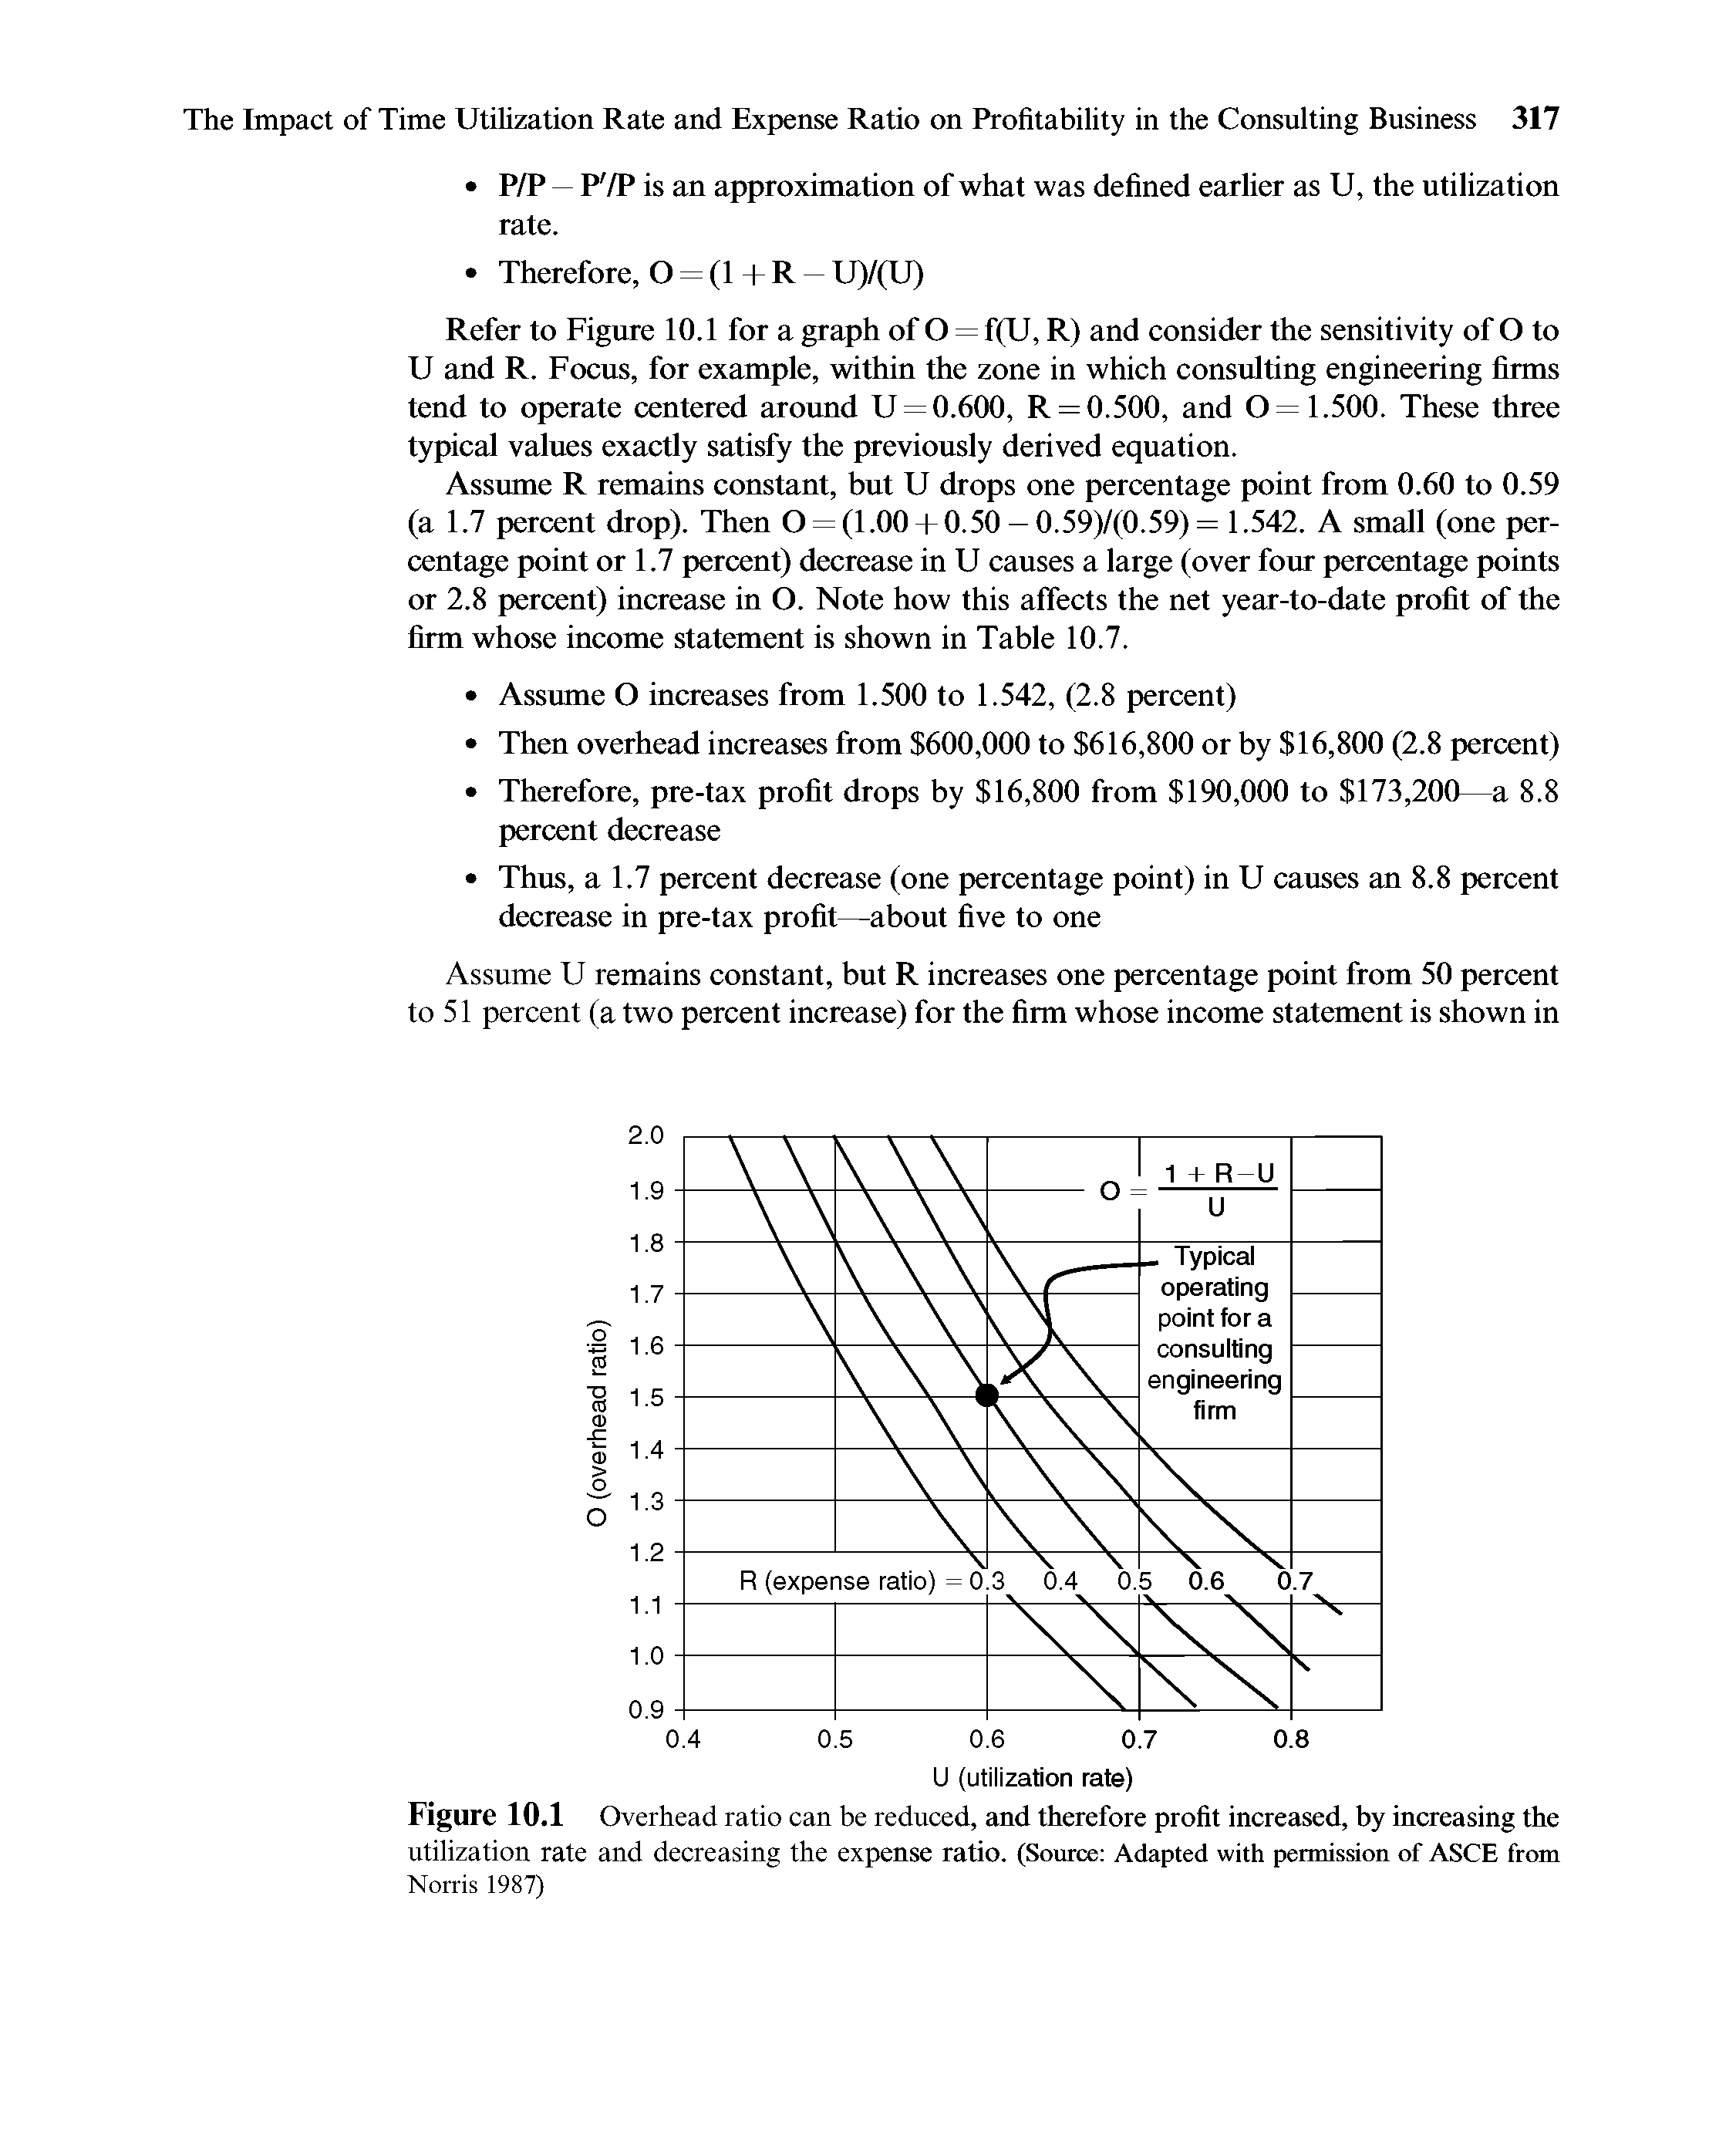 Figure 10.1 Overhead ratio can be reduced, and therefore profit increased, by increasing the utilization rate and decreasing the expense ratio. (Source Adapted with permission of ASCE from Norris 1987)...